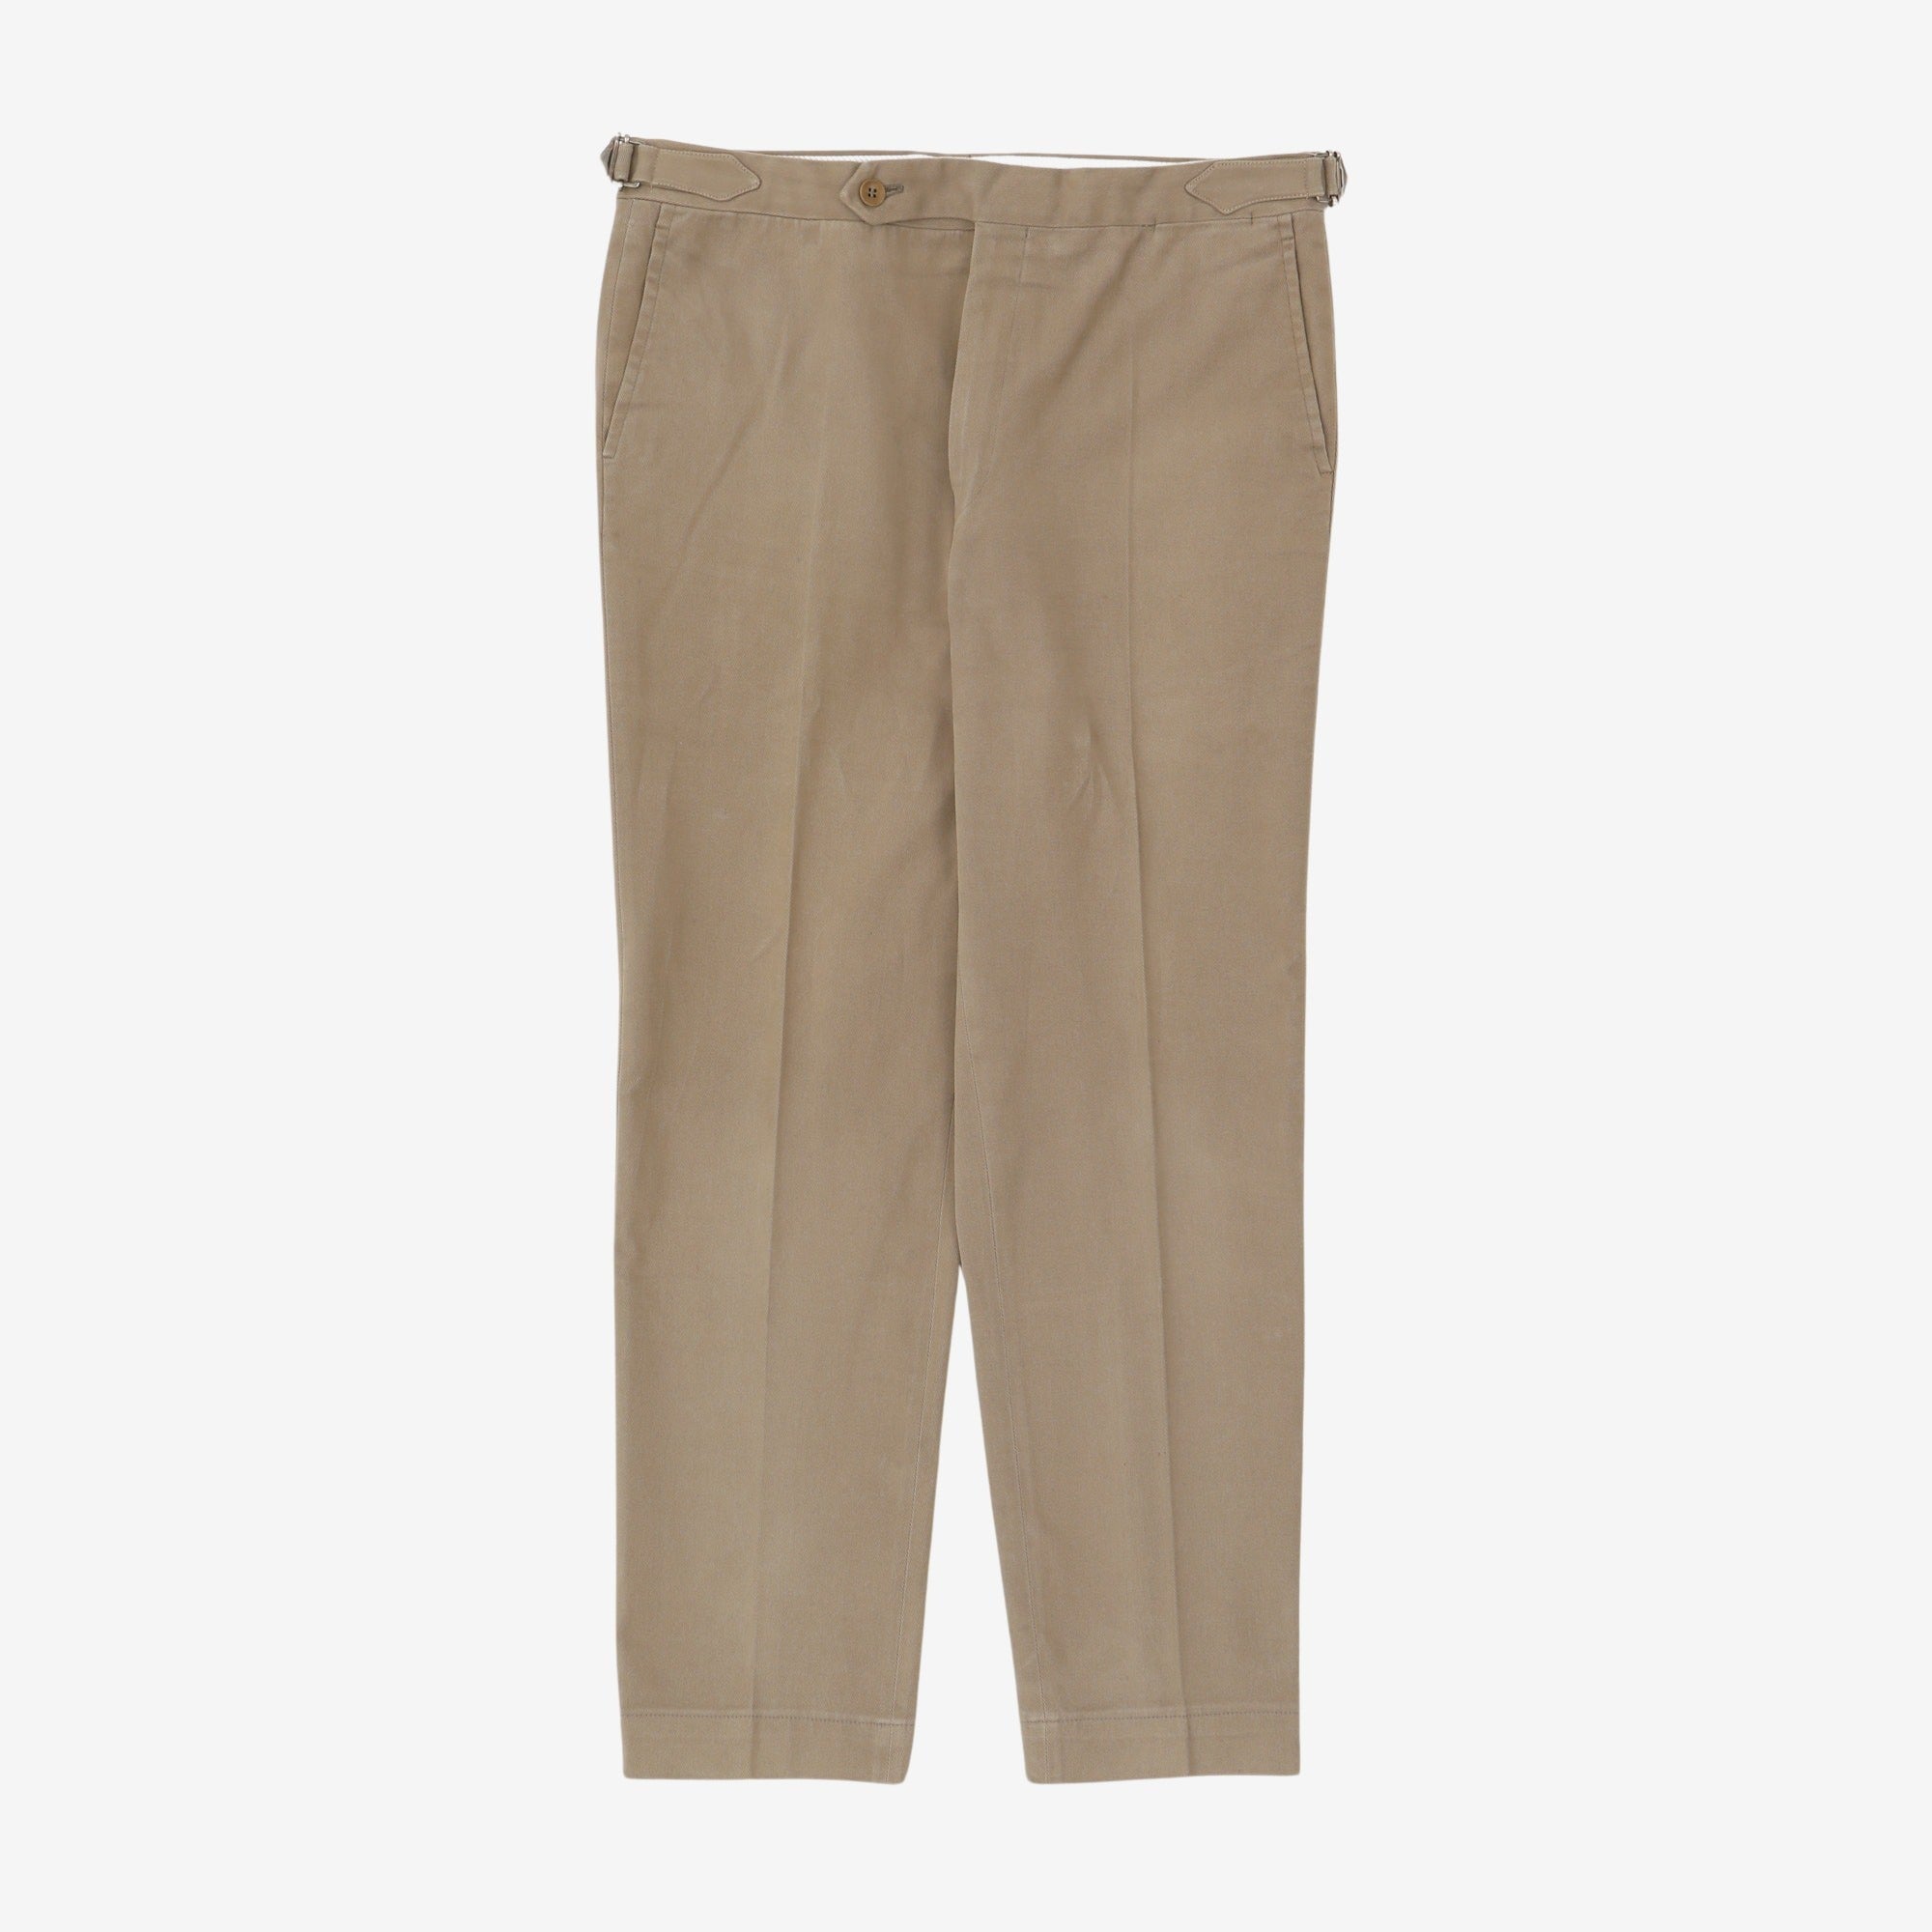 Chino Trousers (35W, 30L)